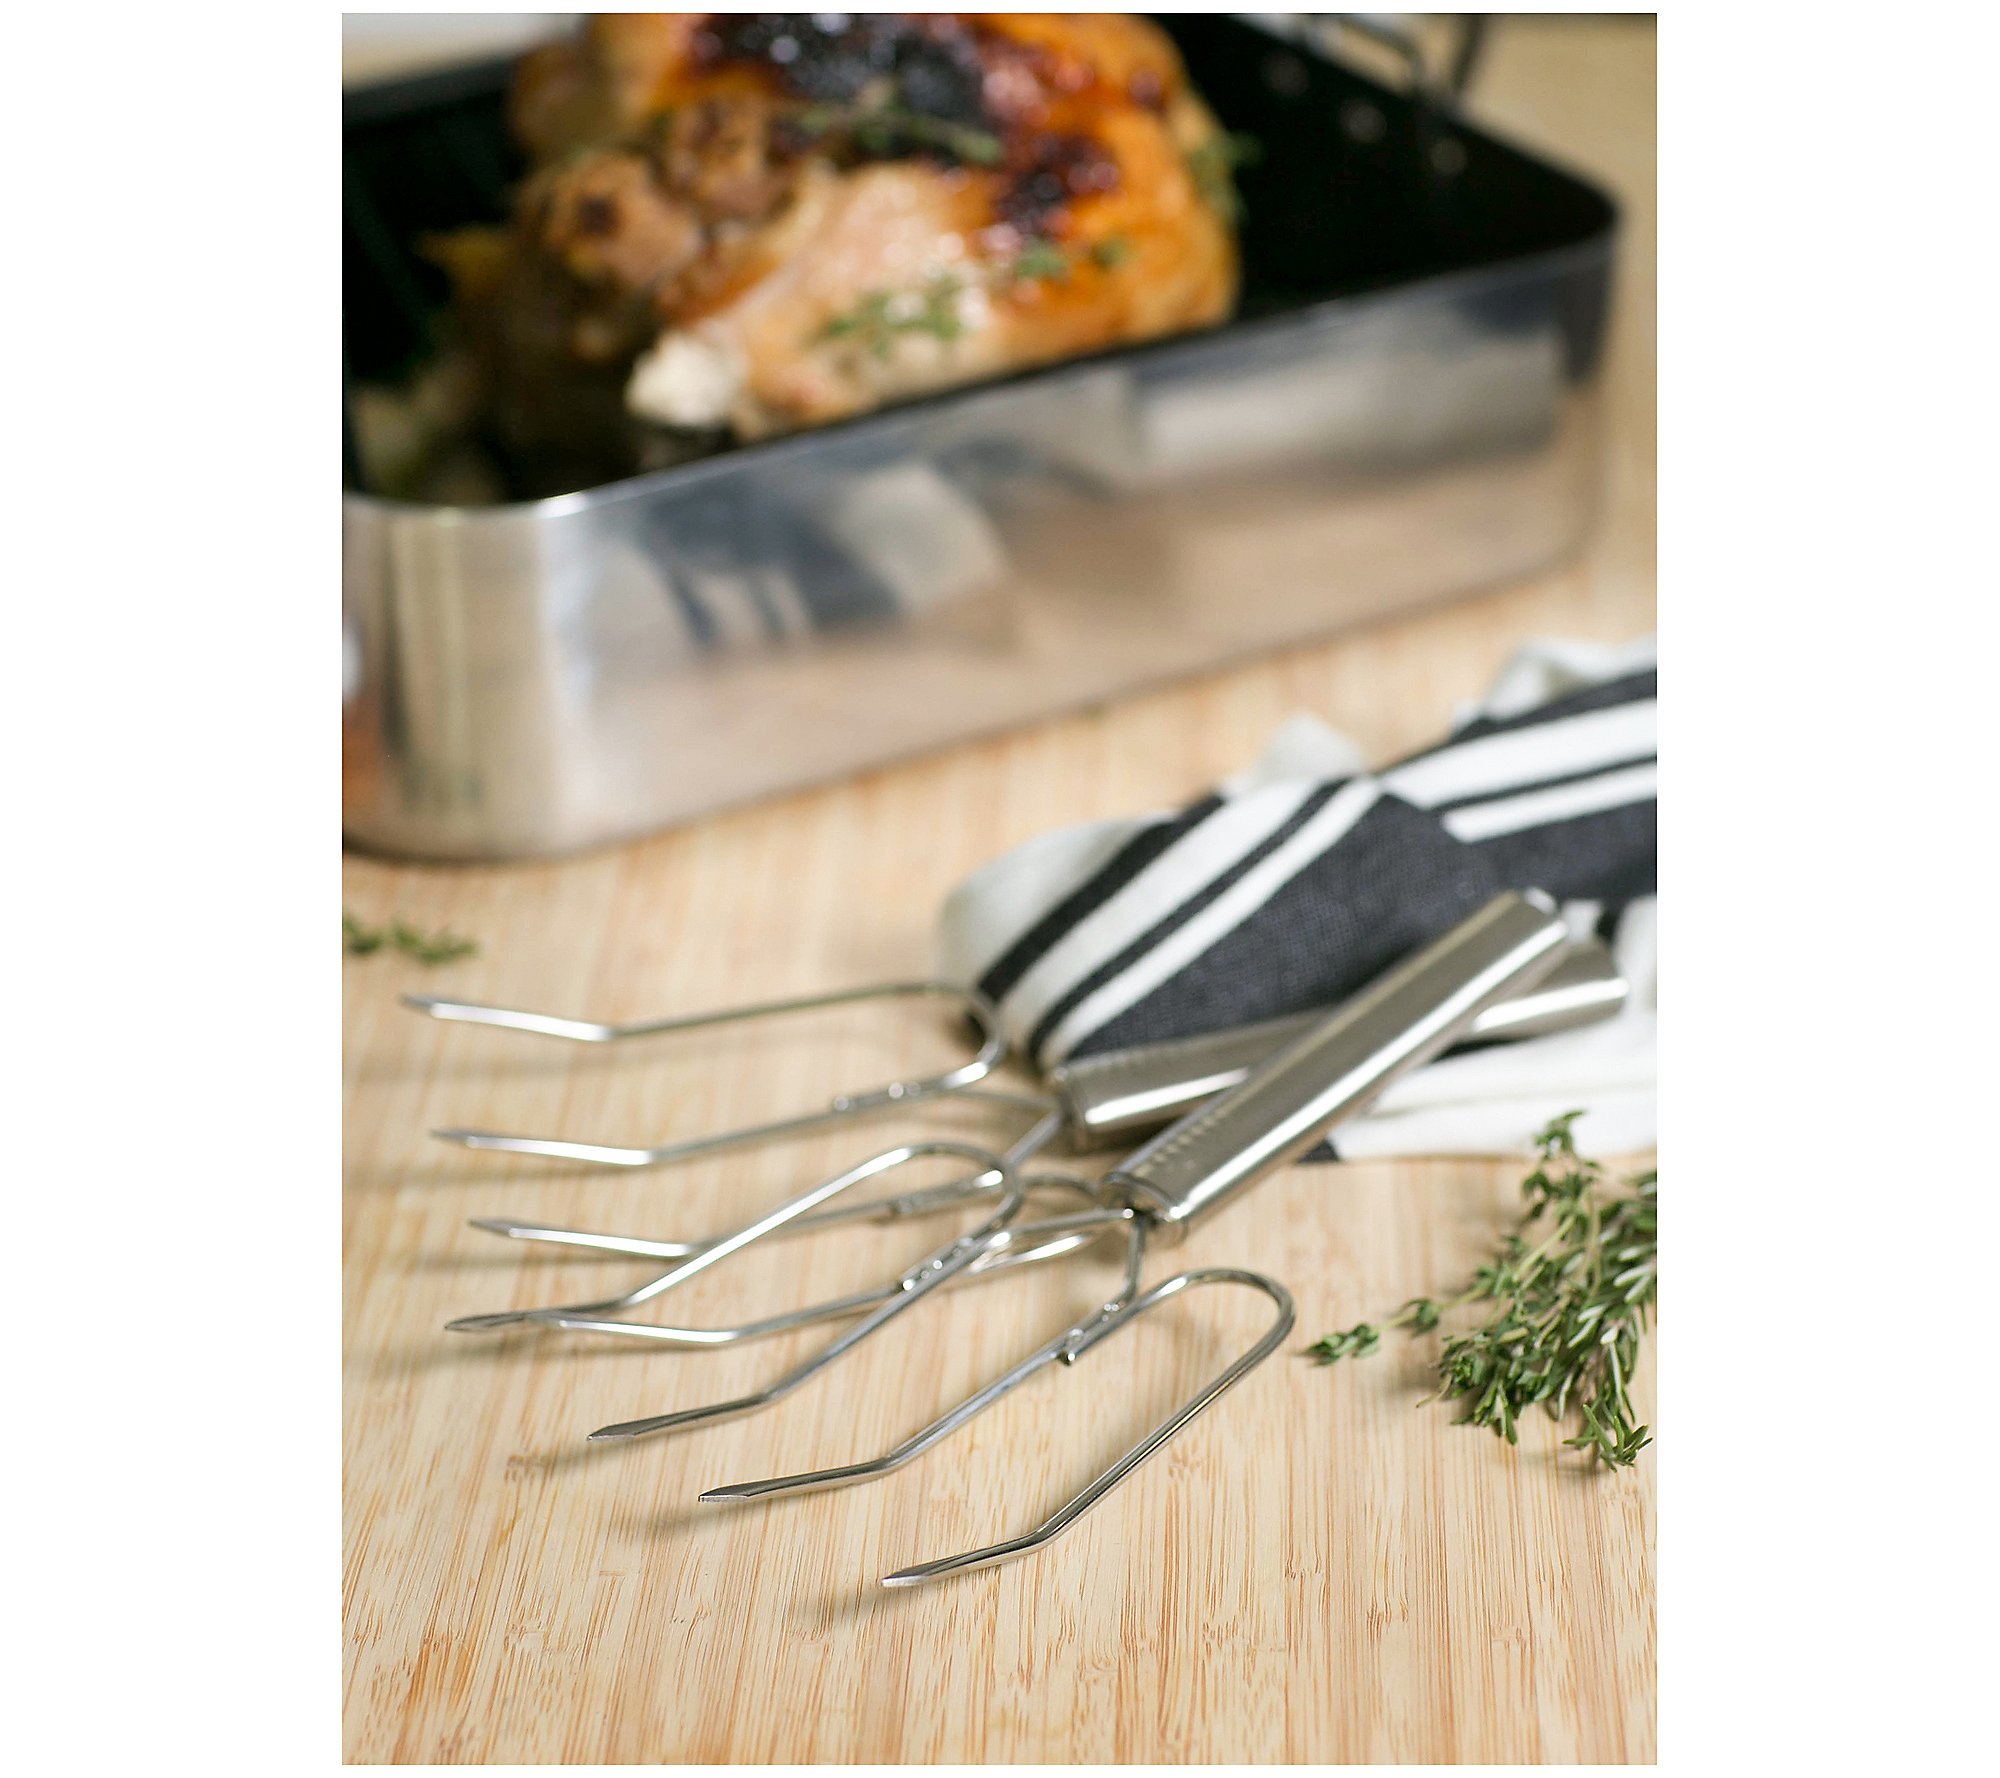 RSVP Set of 2 Stainless Steel Turkey Lifters